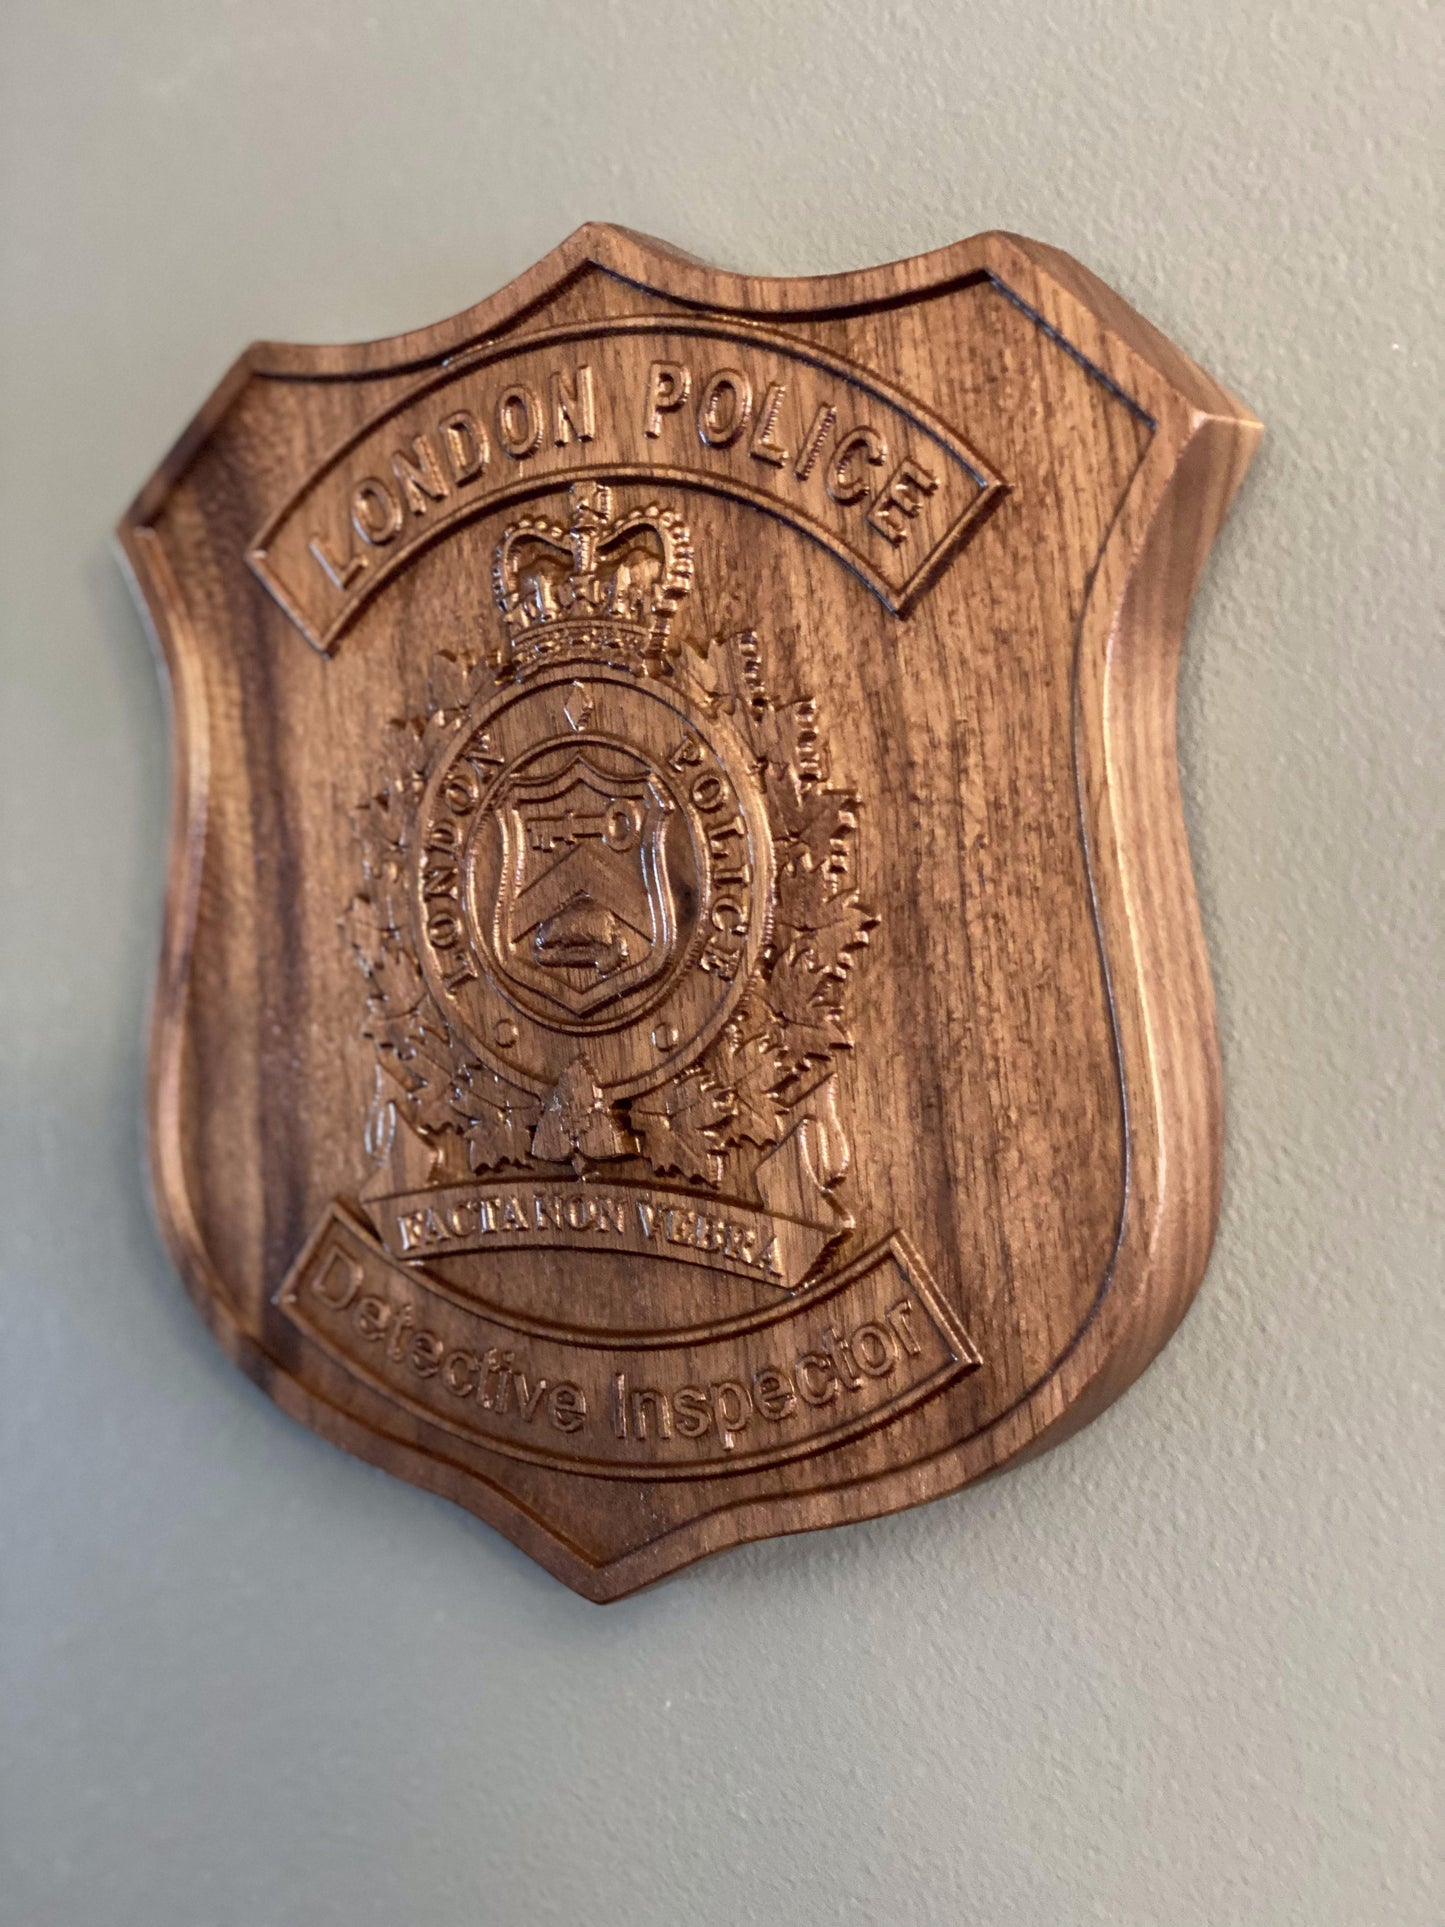 London Police Wooden Badge